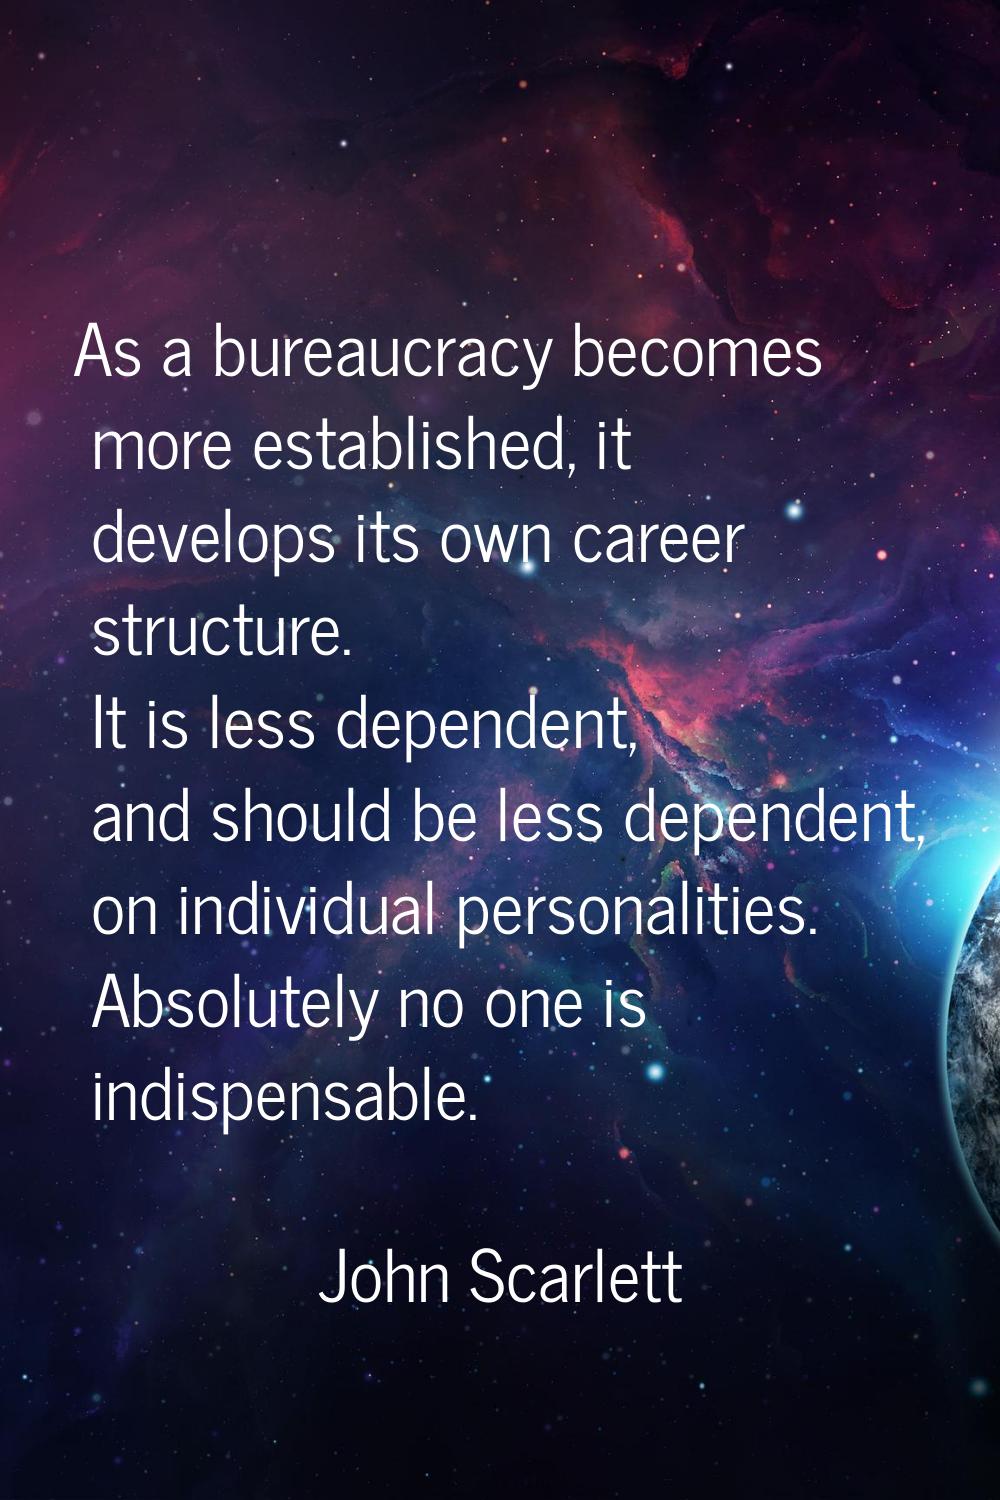 As a bureaucracy becomes more established, it develops its own career structure. It is less depende